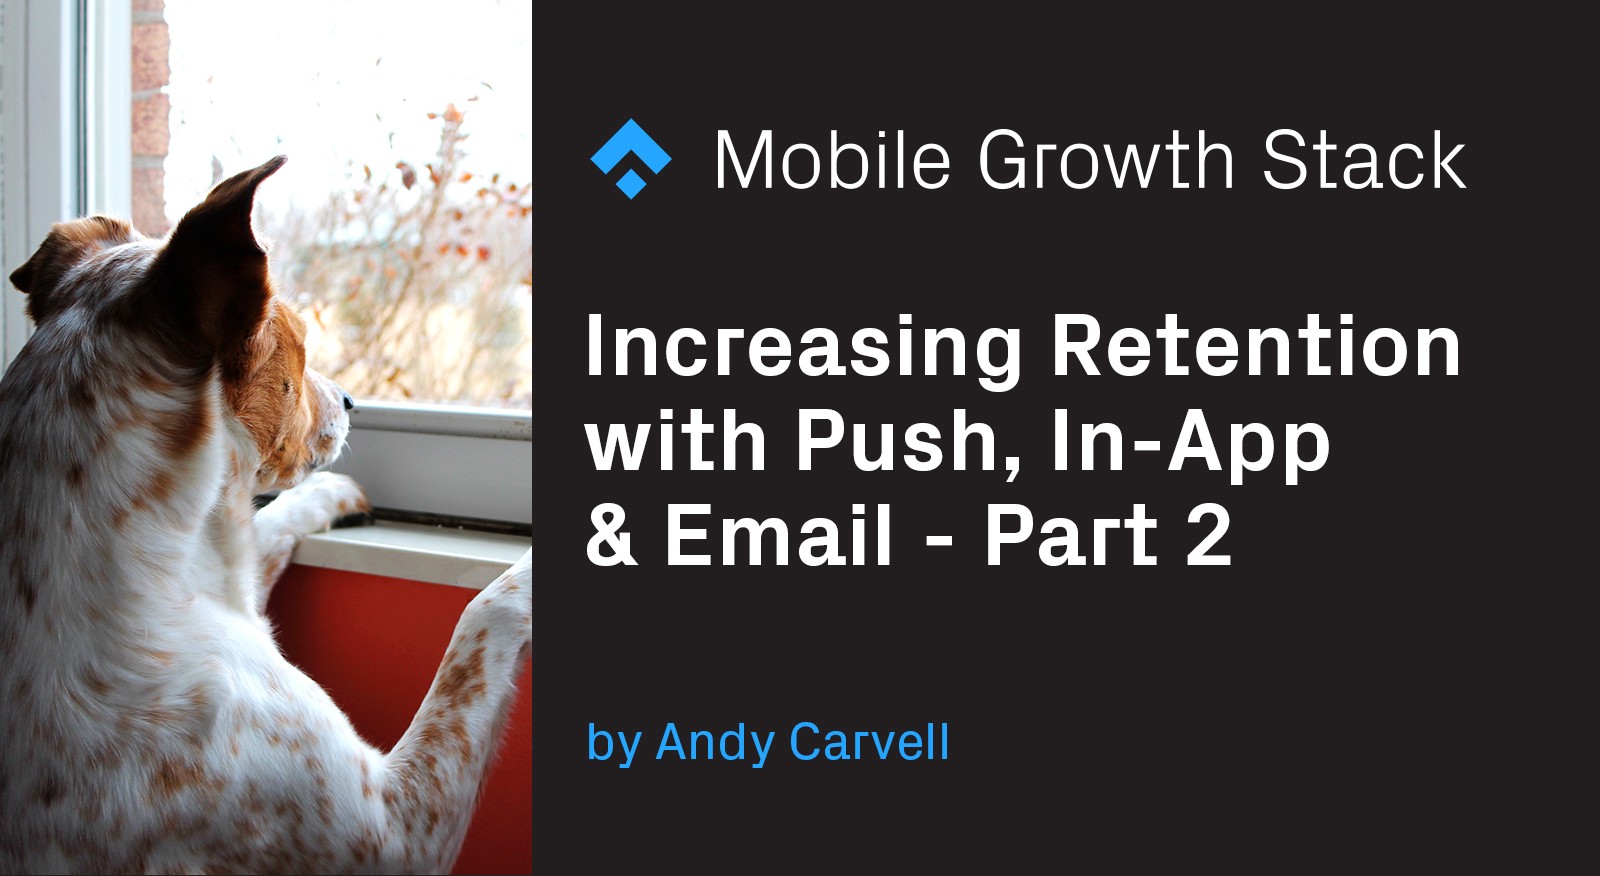 Increasing Retention with Push, In-App and Email Part 2: Developing a Mobile CRM Strategy for Retention